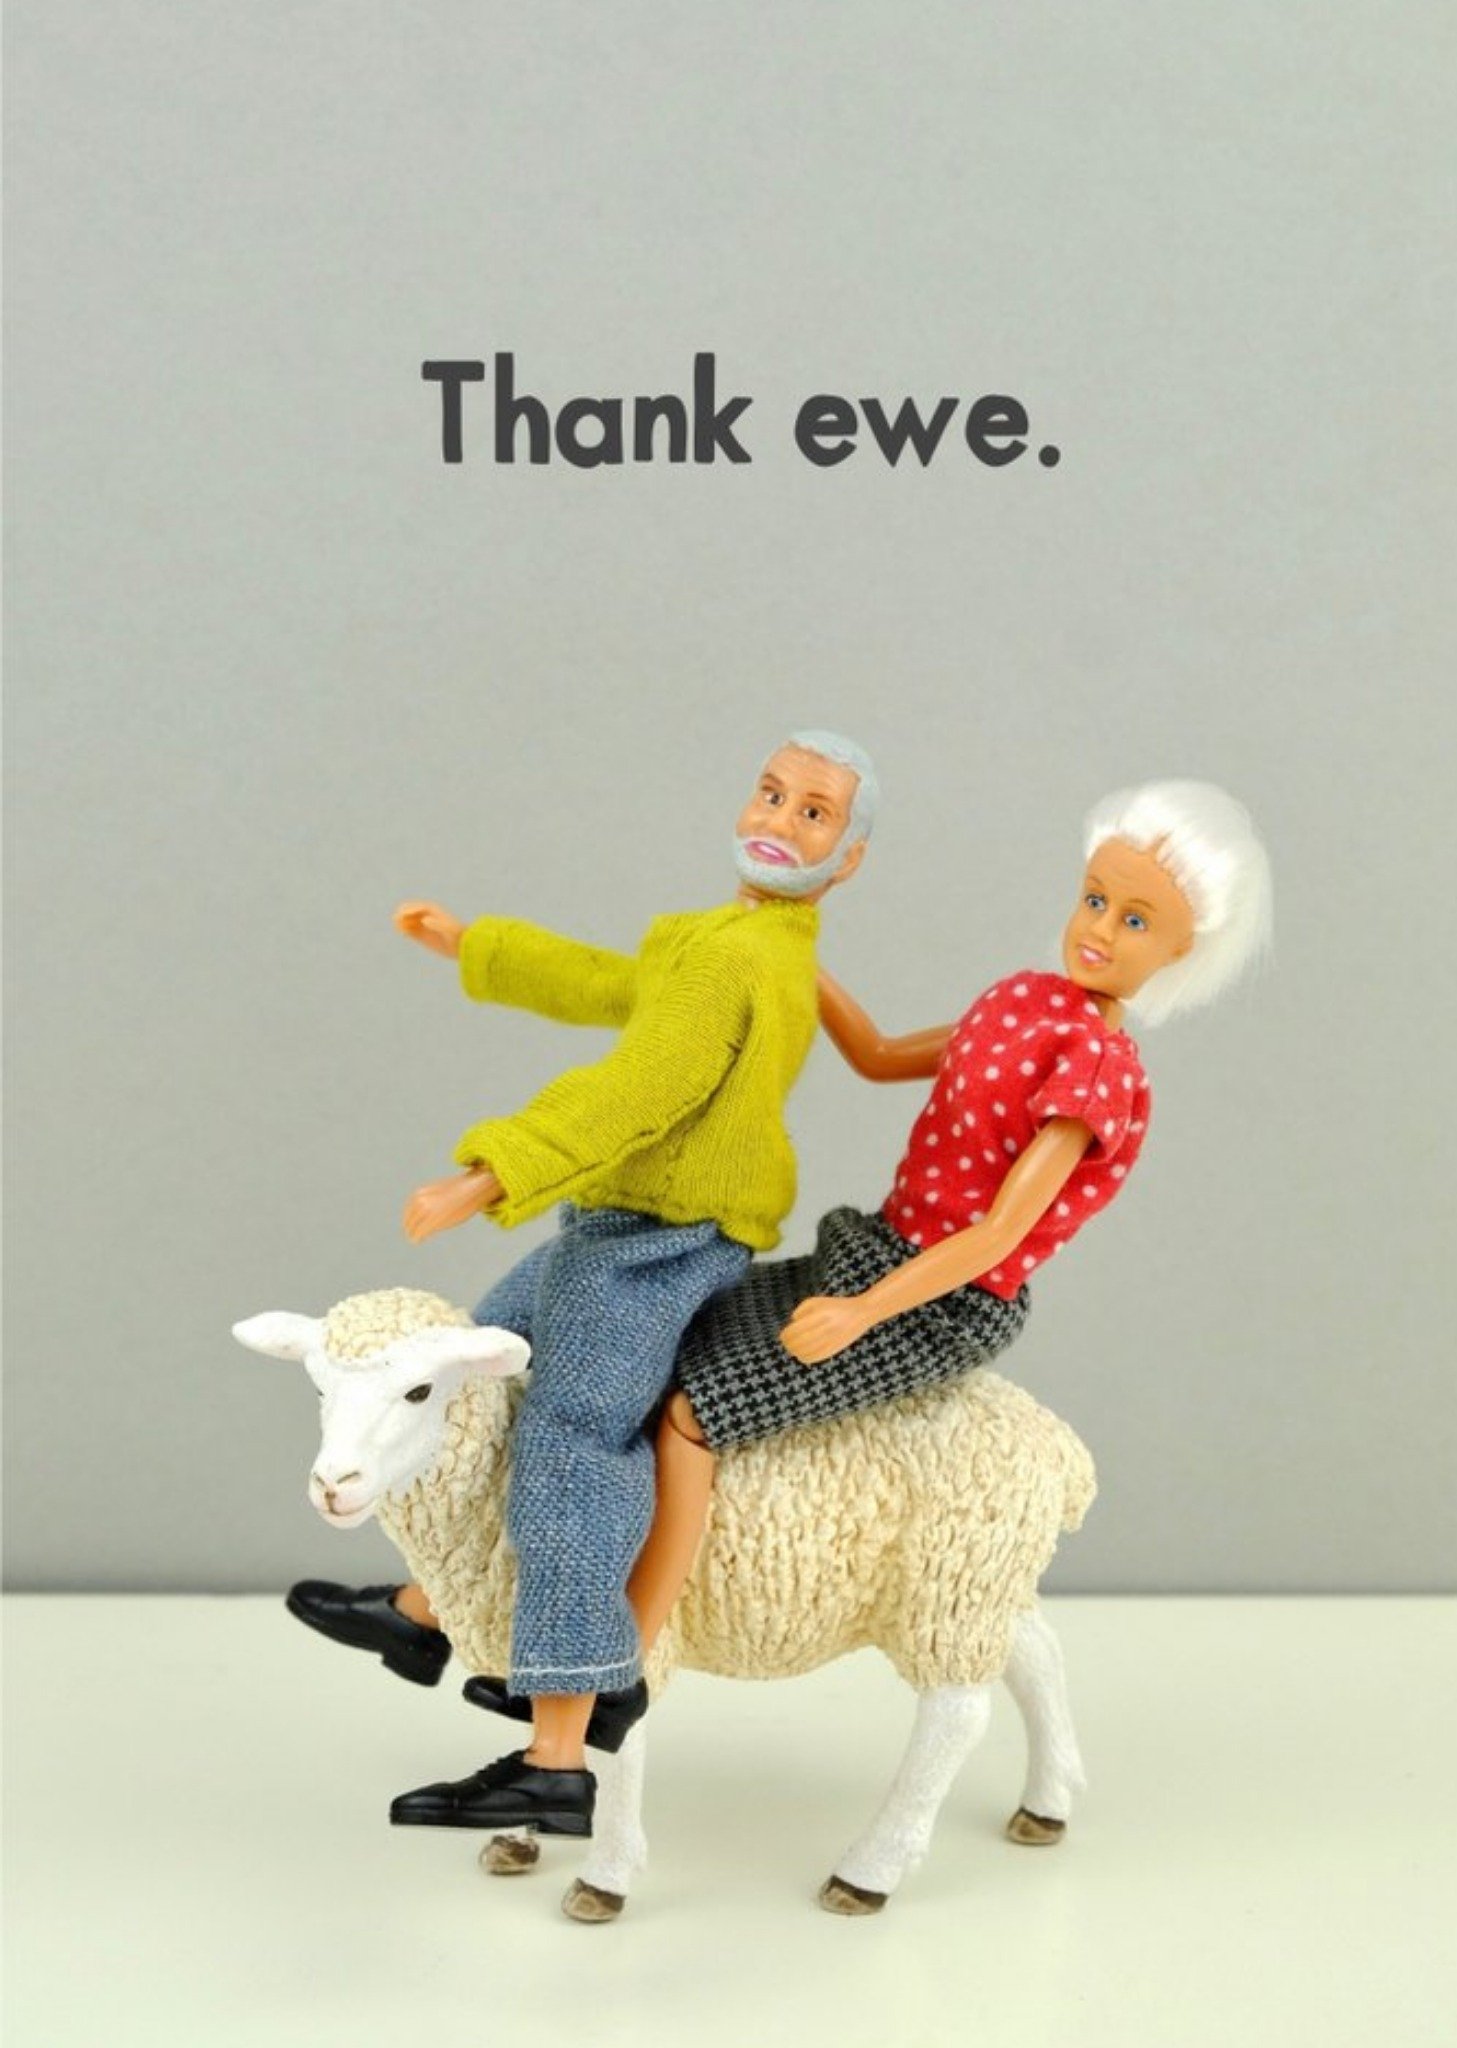 Bold And Bright Funny Photograph Of A Female And Male Doll Riding On A Sheep Thank You Card, Large